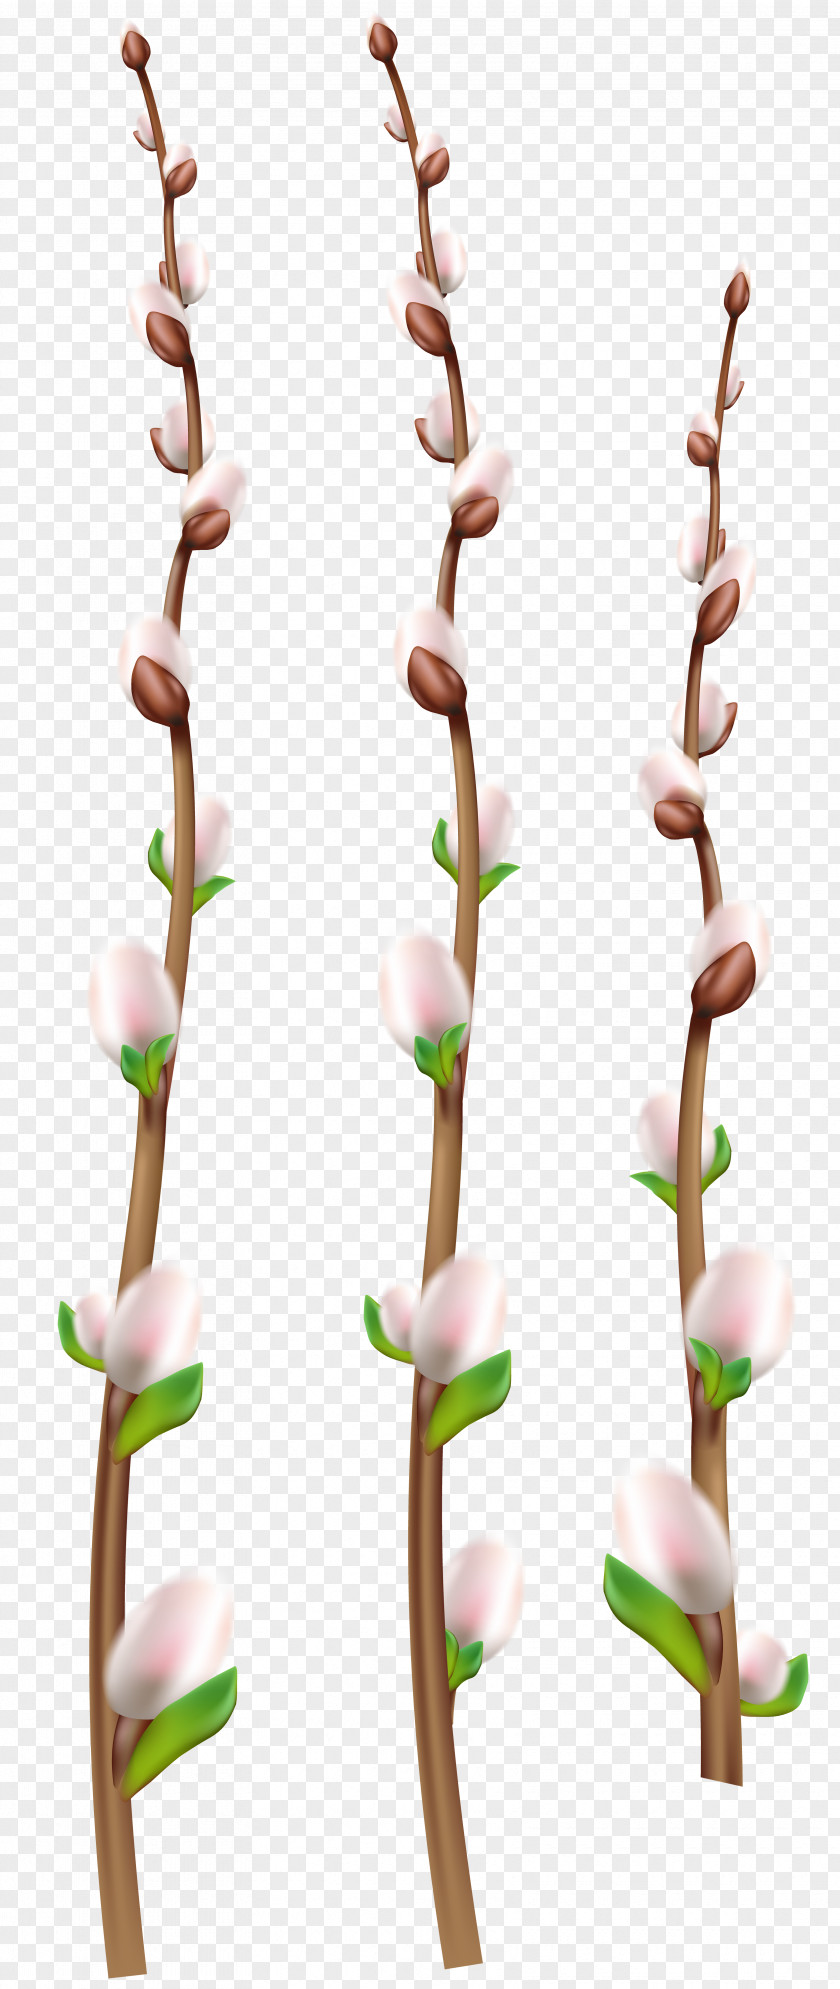 Willow Twig Clip Art PNG